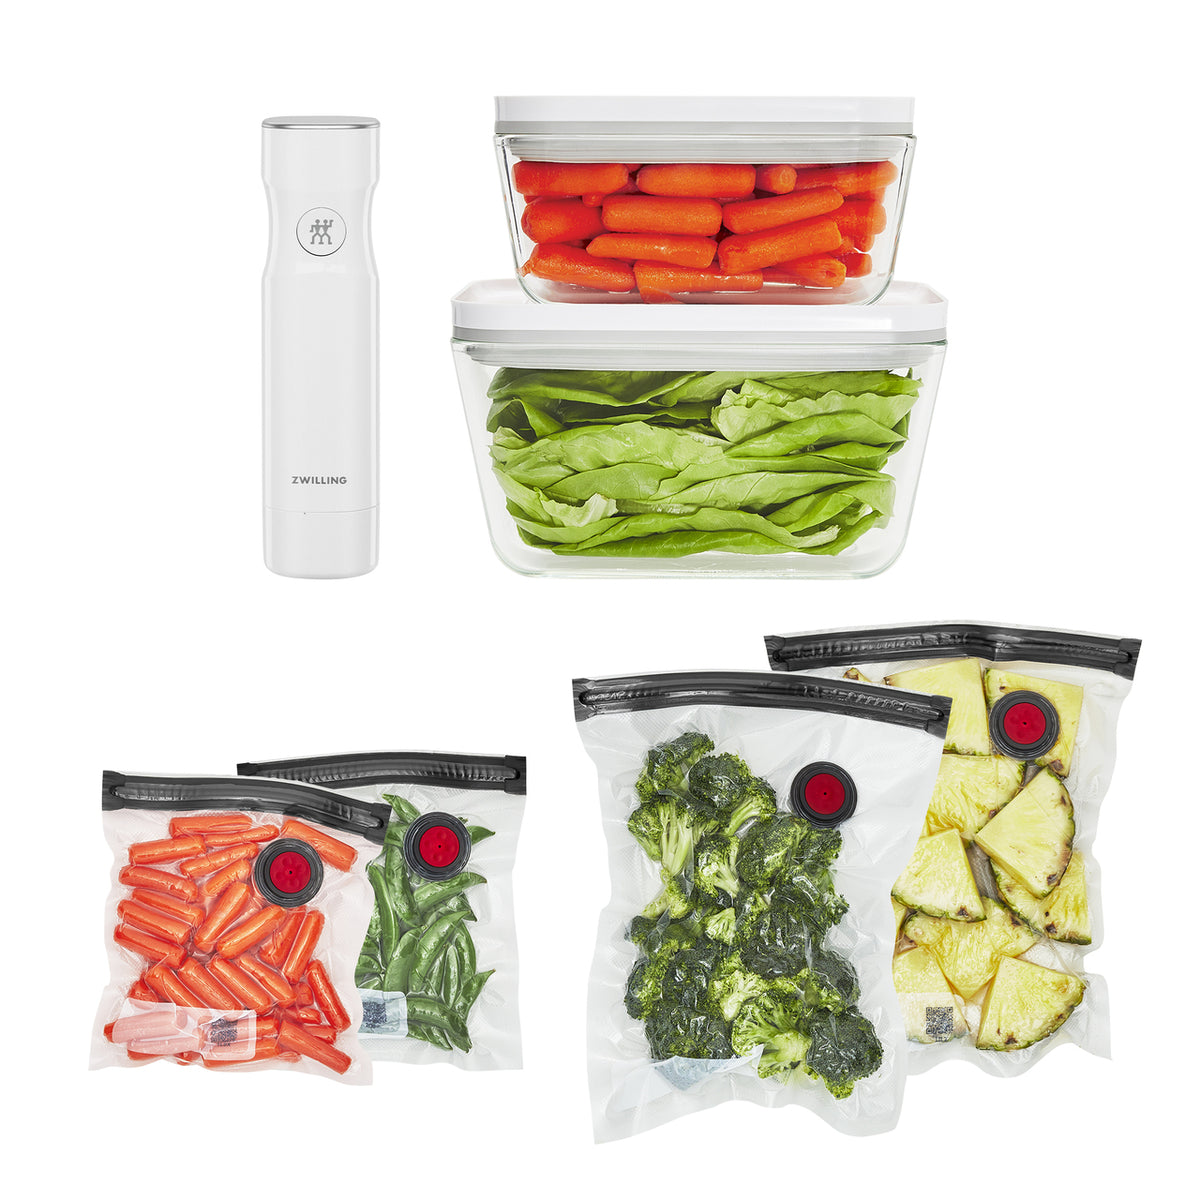 ZWILLING Fresh & Save Vacuum Sealer Machine Starter Set, Sous Vide Bags, Meal prep, Airtight Food Storage Containers